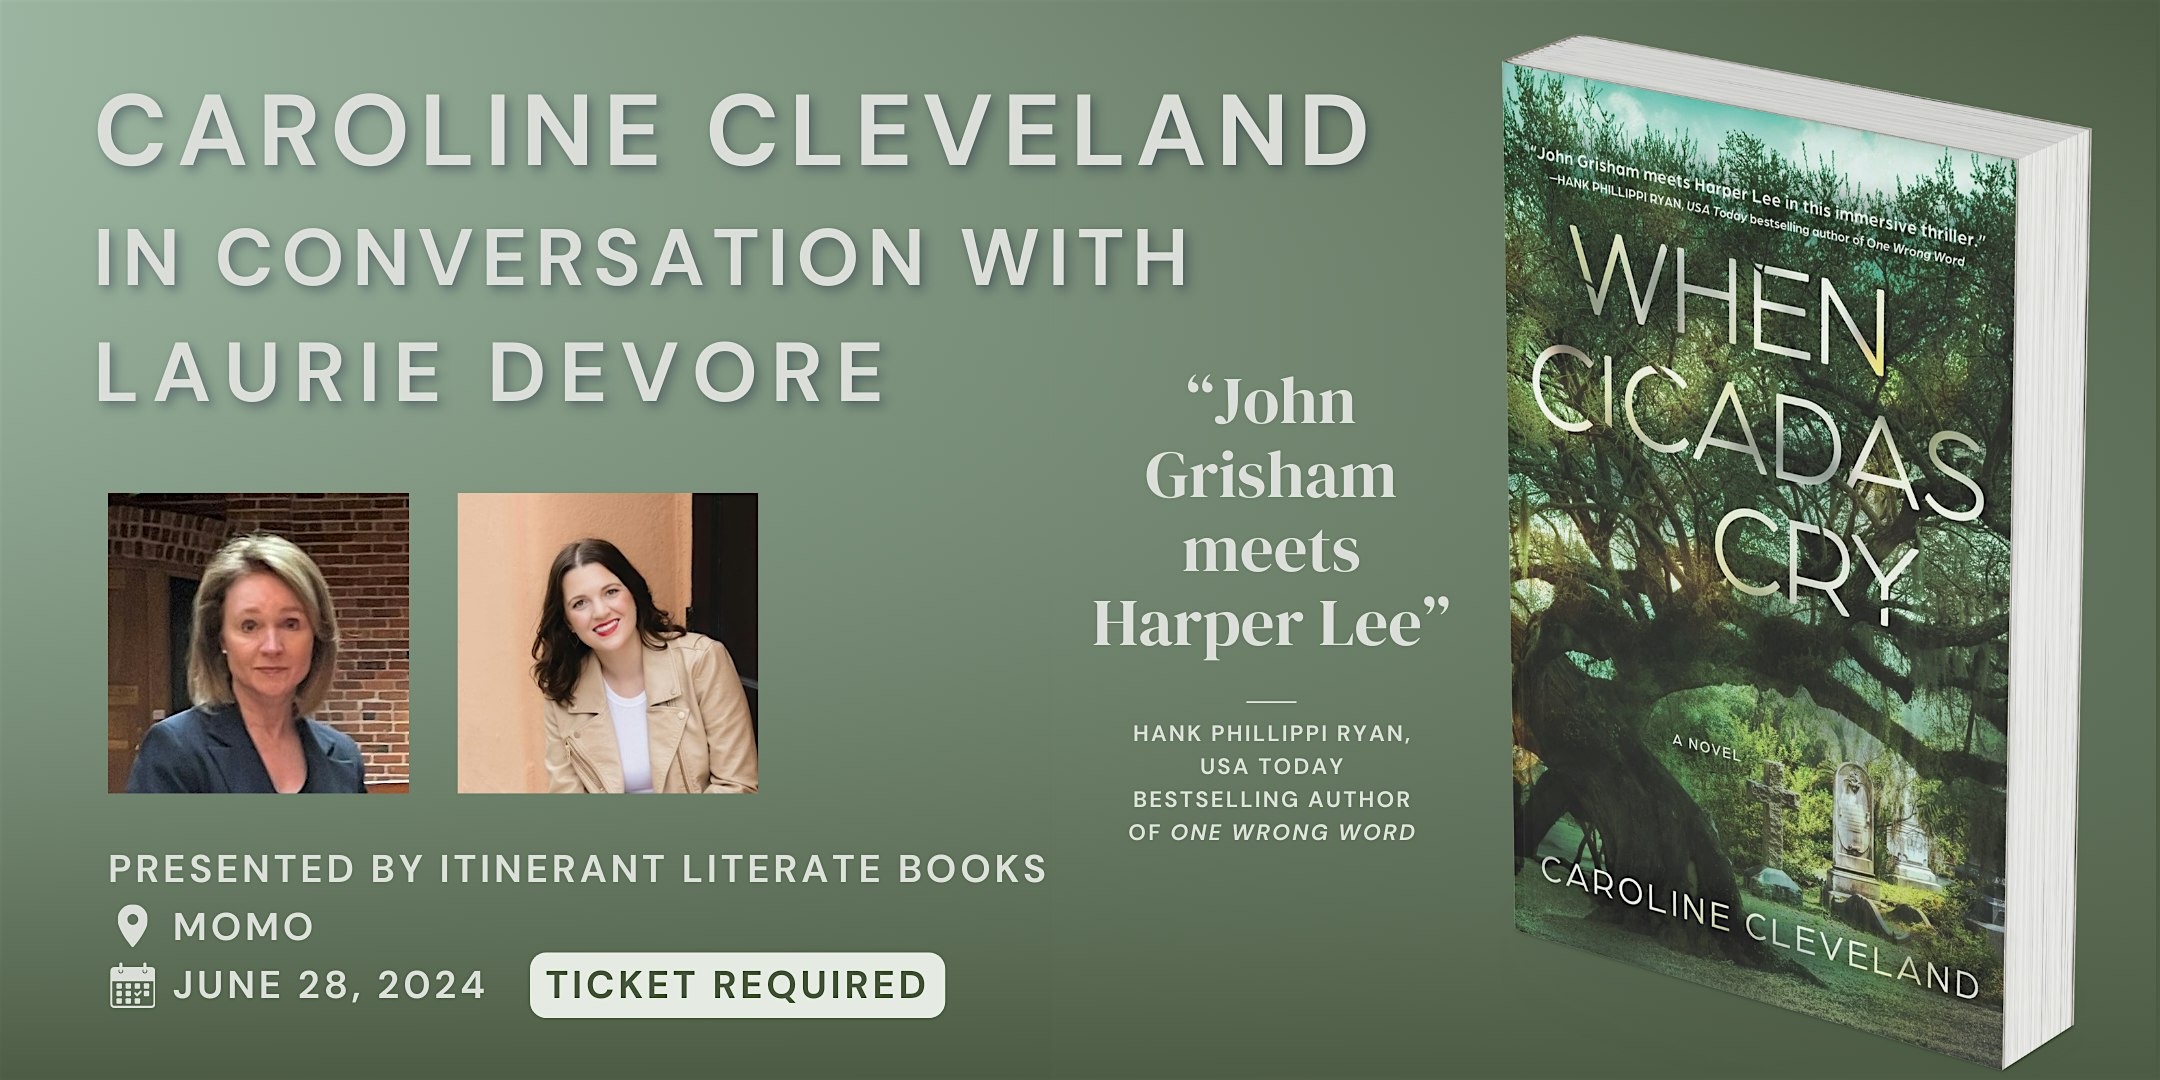 Meet the Authors: Caroline Cleveland in Conversation with Laurie Devore